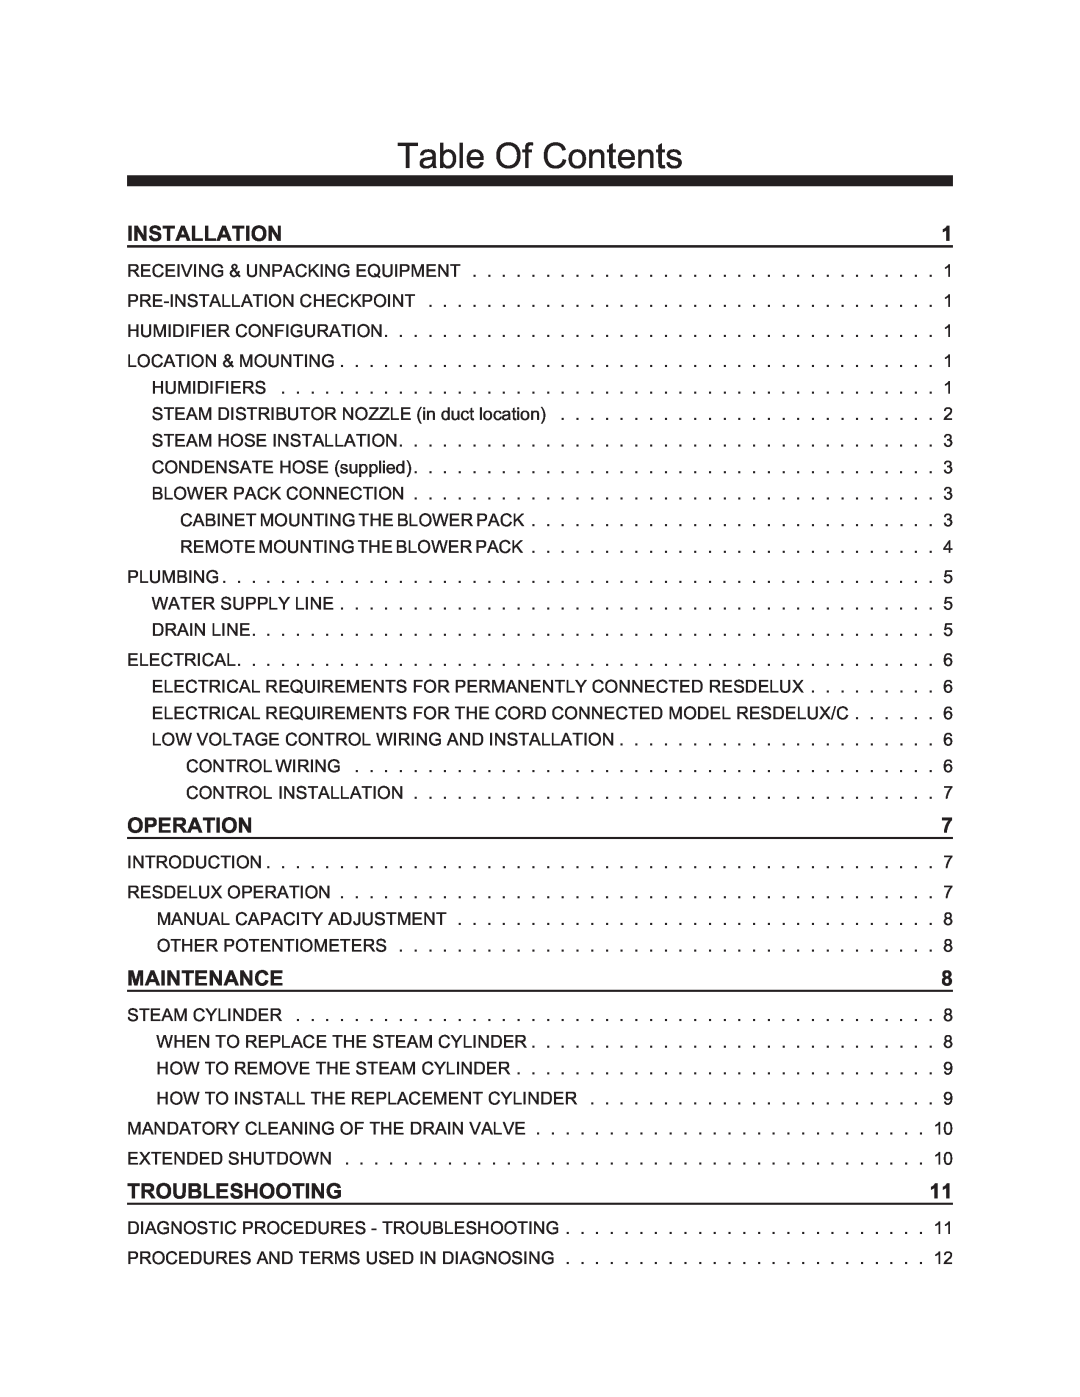 Nortec 1505691-B manual Installation, Operation, Maintenance, Troubleshooting, Table Of Contents 